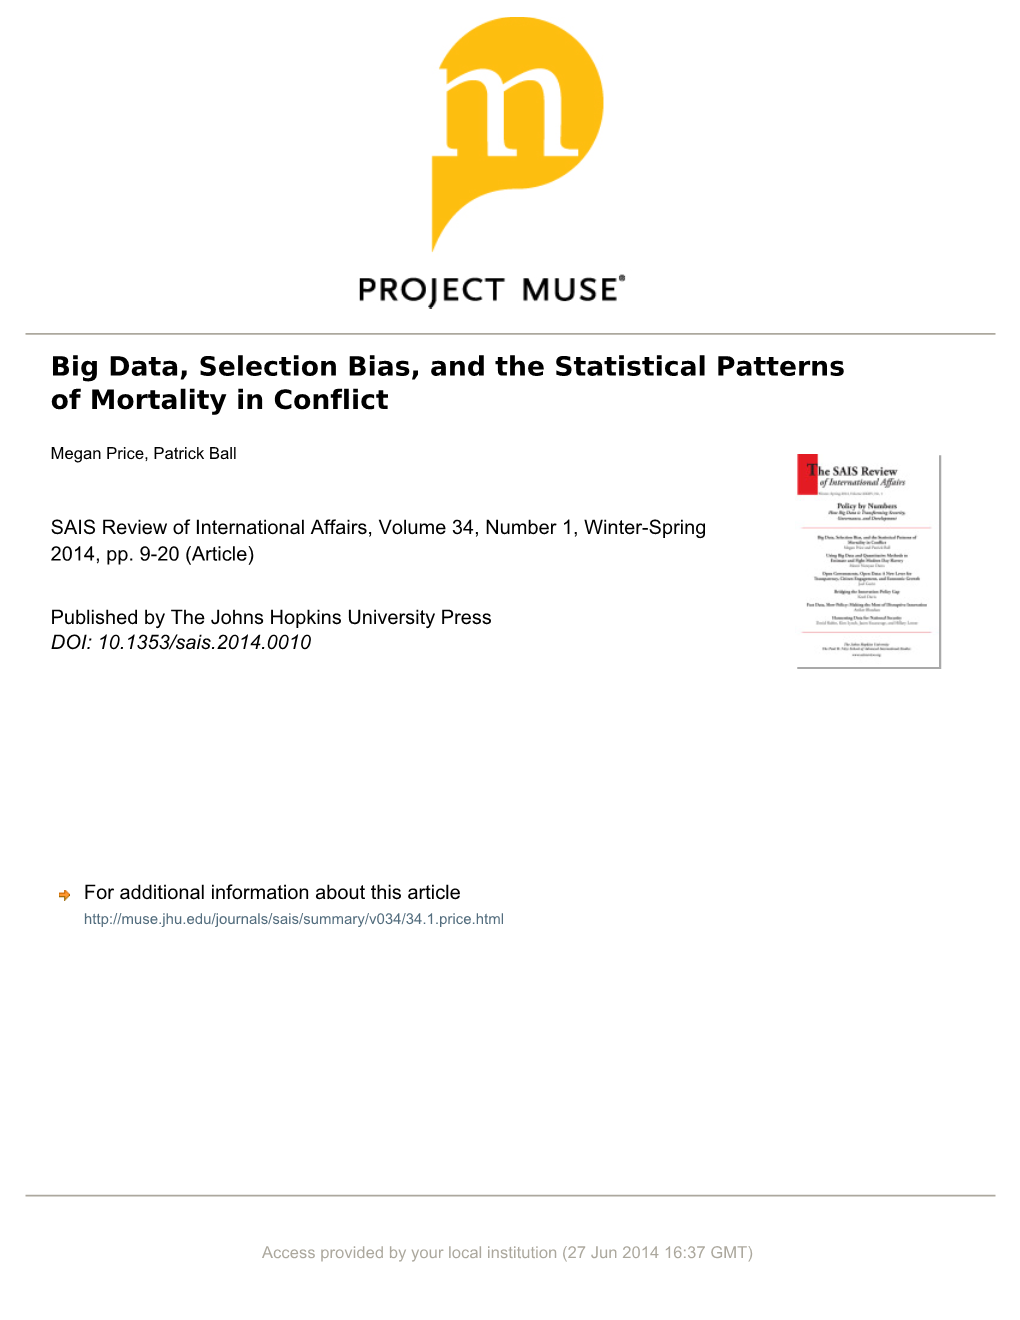 Big Data, Selection Bias, and the Statistical Patterns of Mortality in Conflict